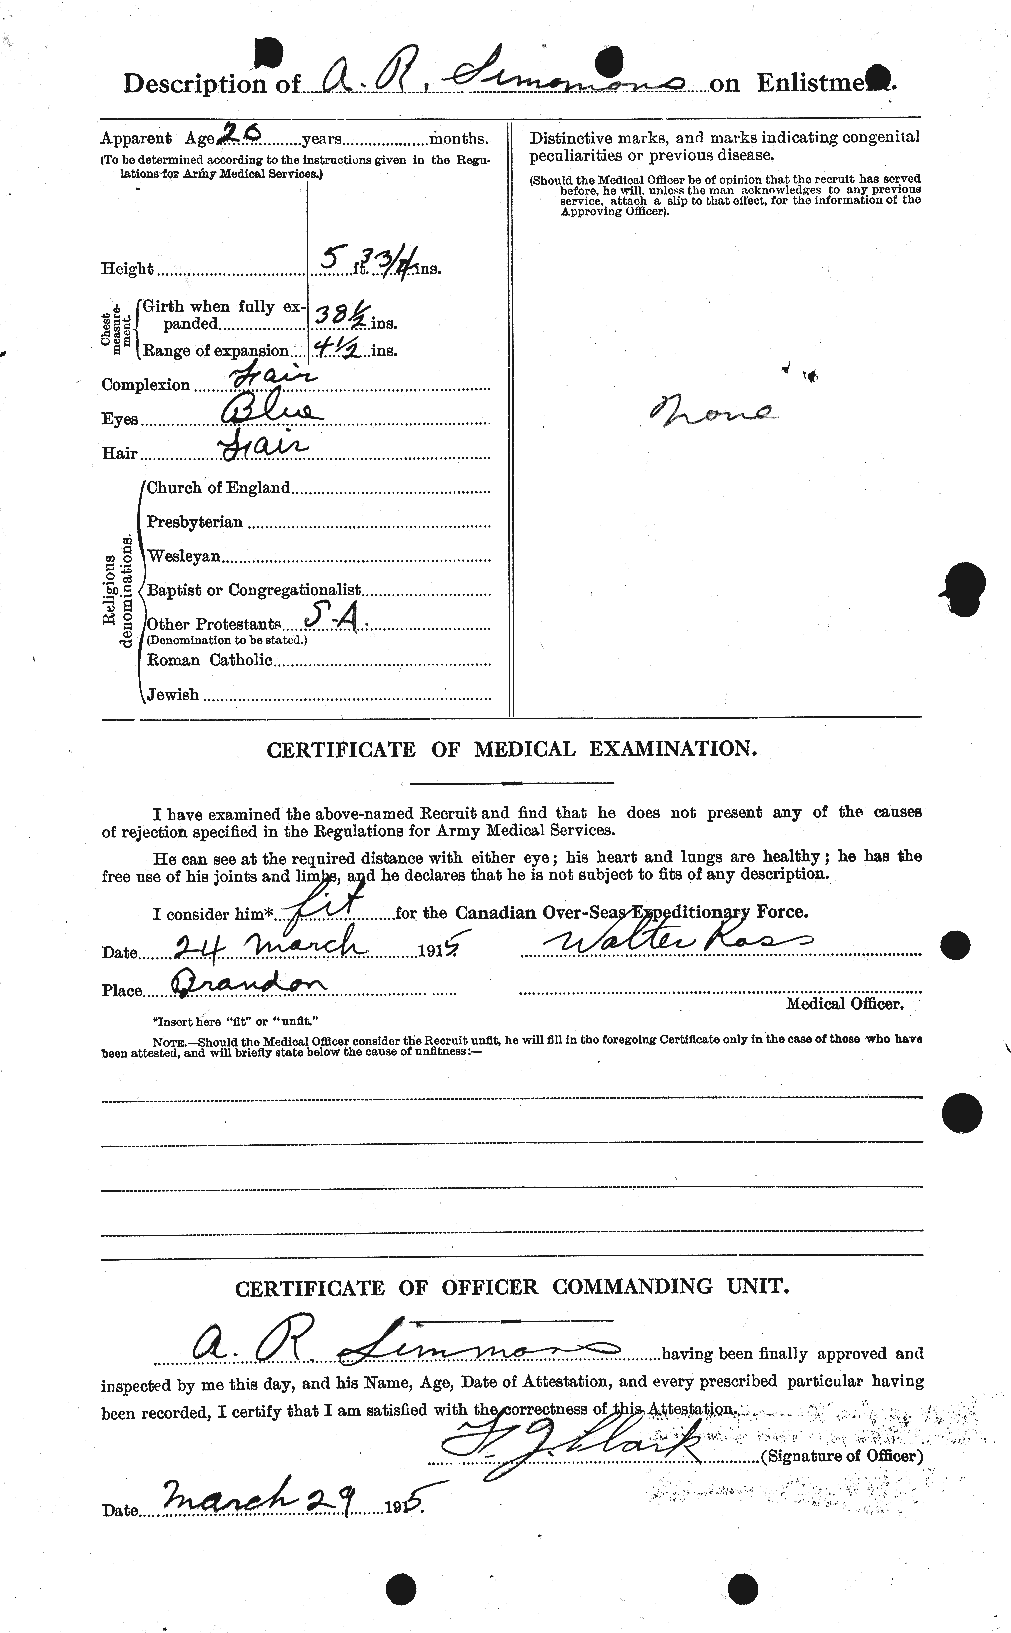 Personnel Records of the First World War - CEF 099161b